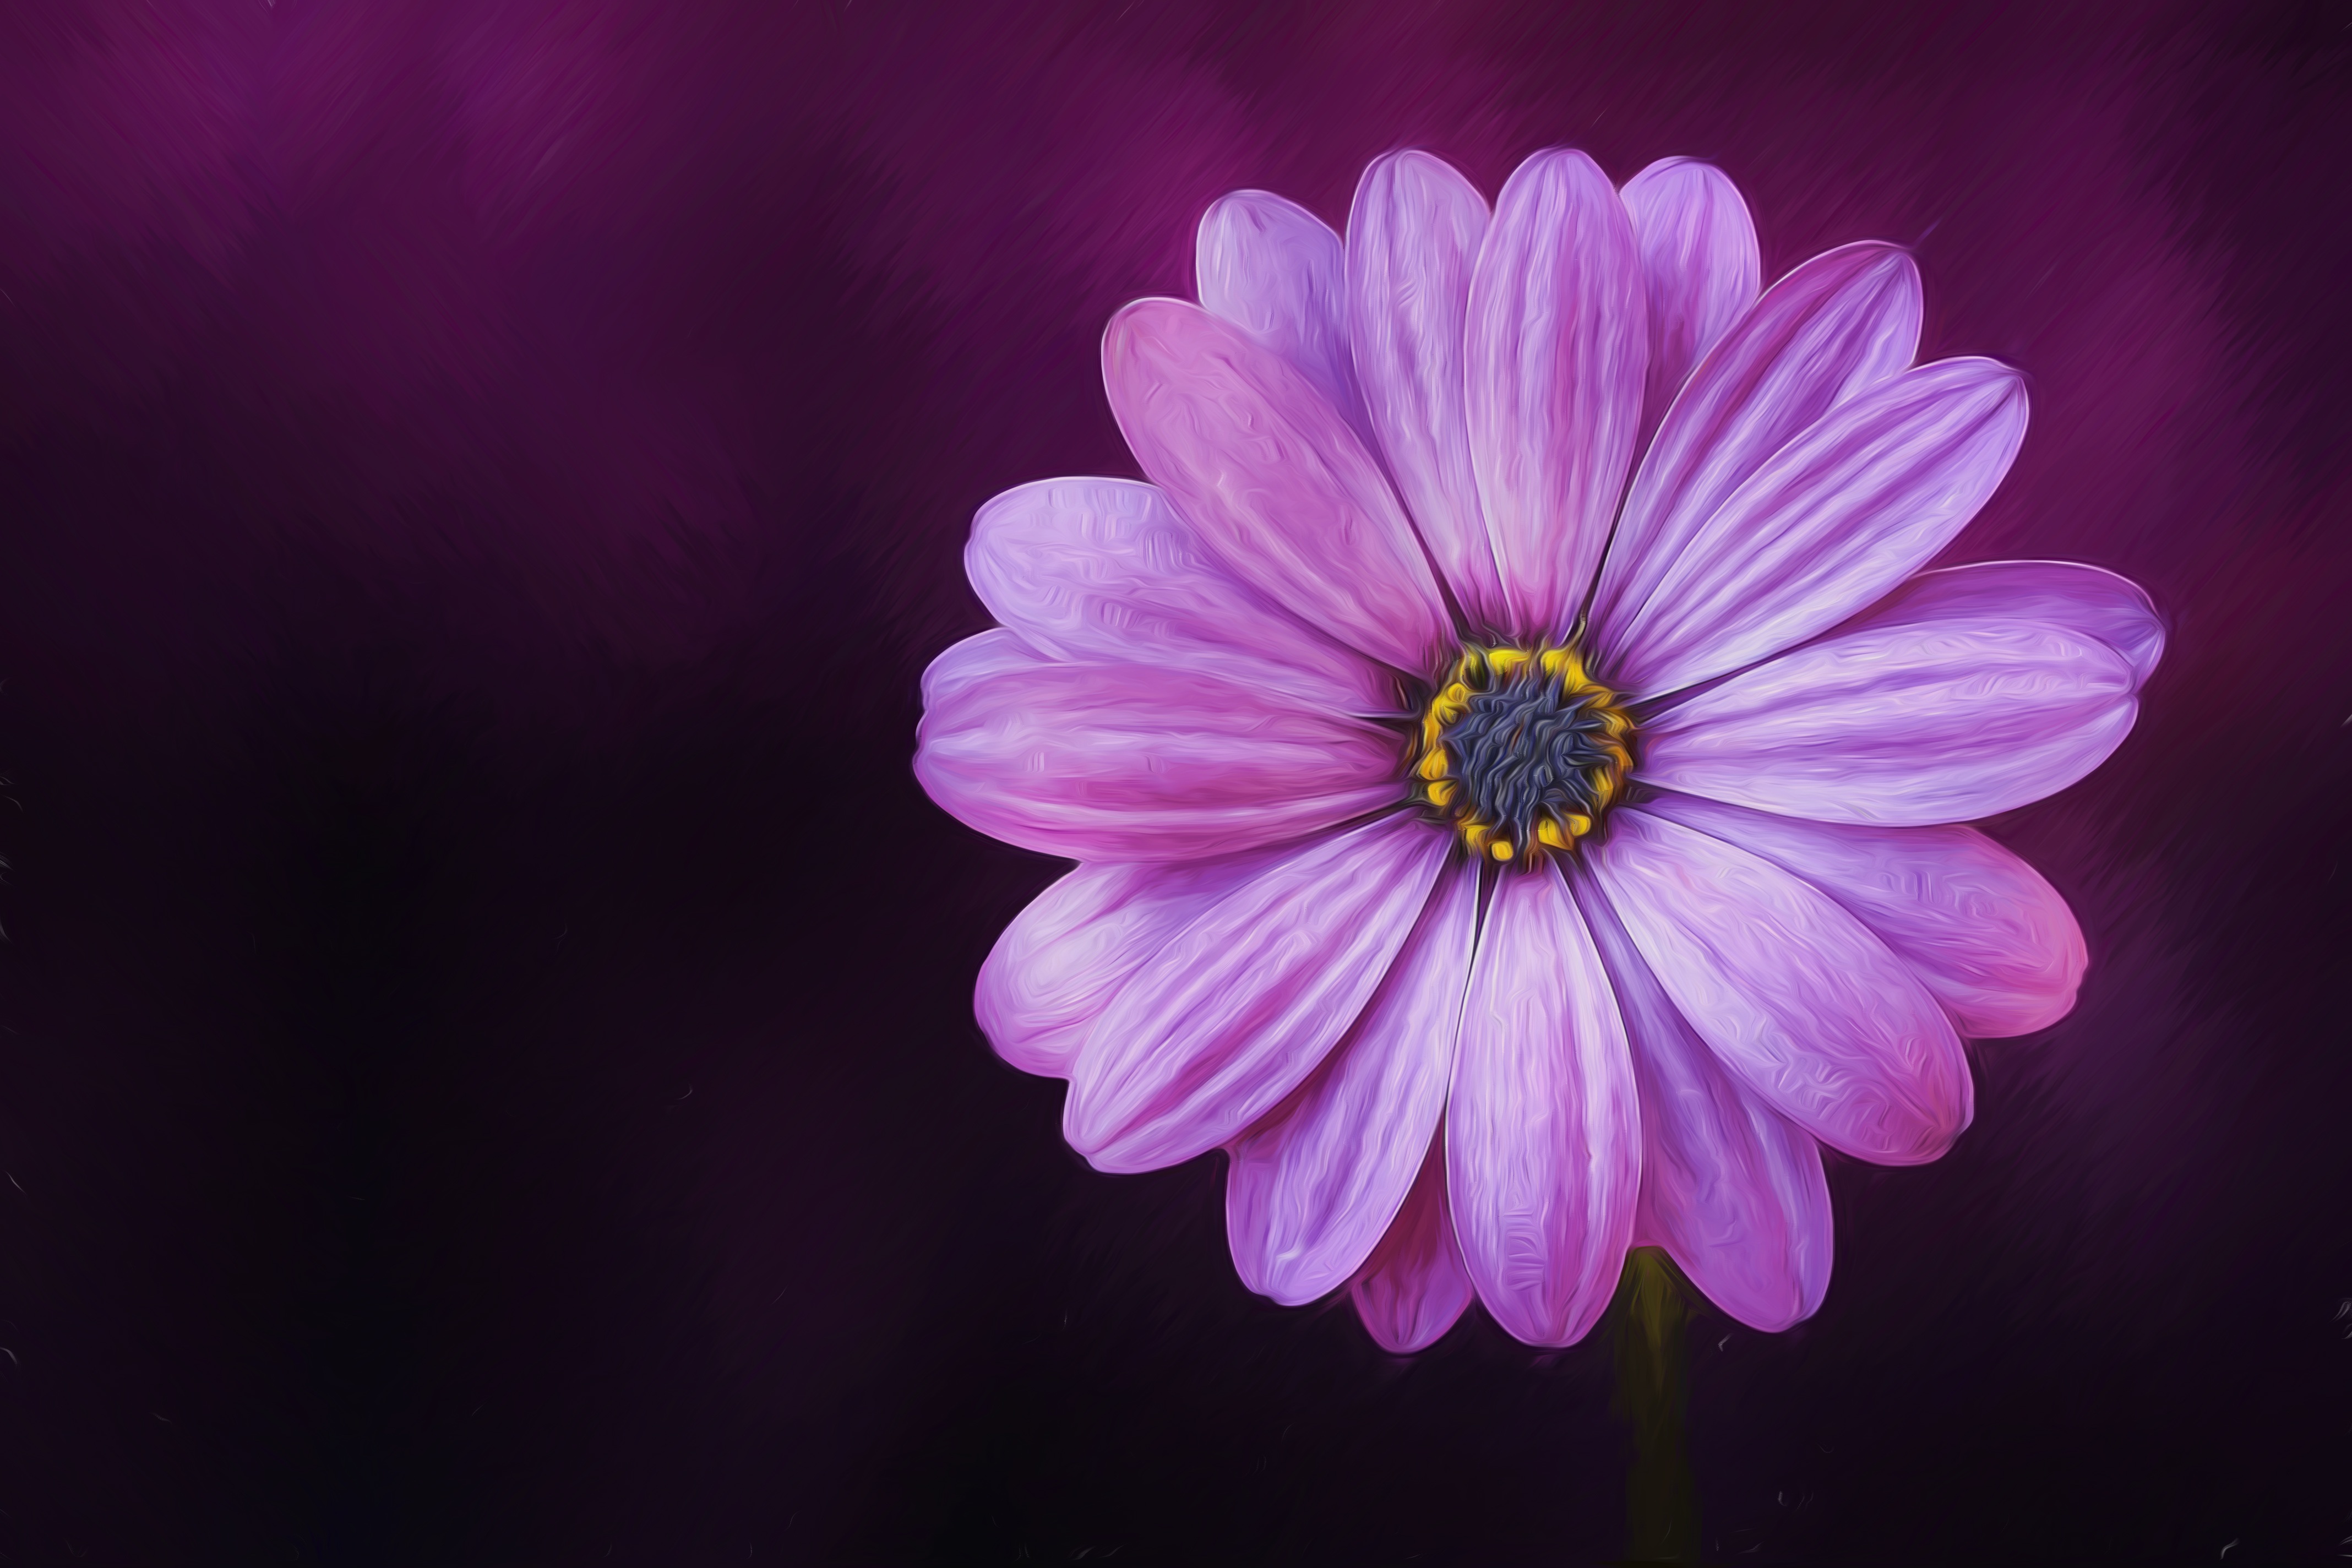 Daisy Flower Purple Flower Nature Artistic Oil Painting Painting 4272x2848